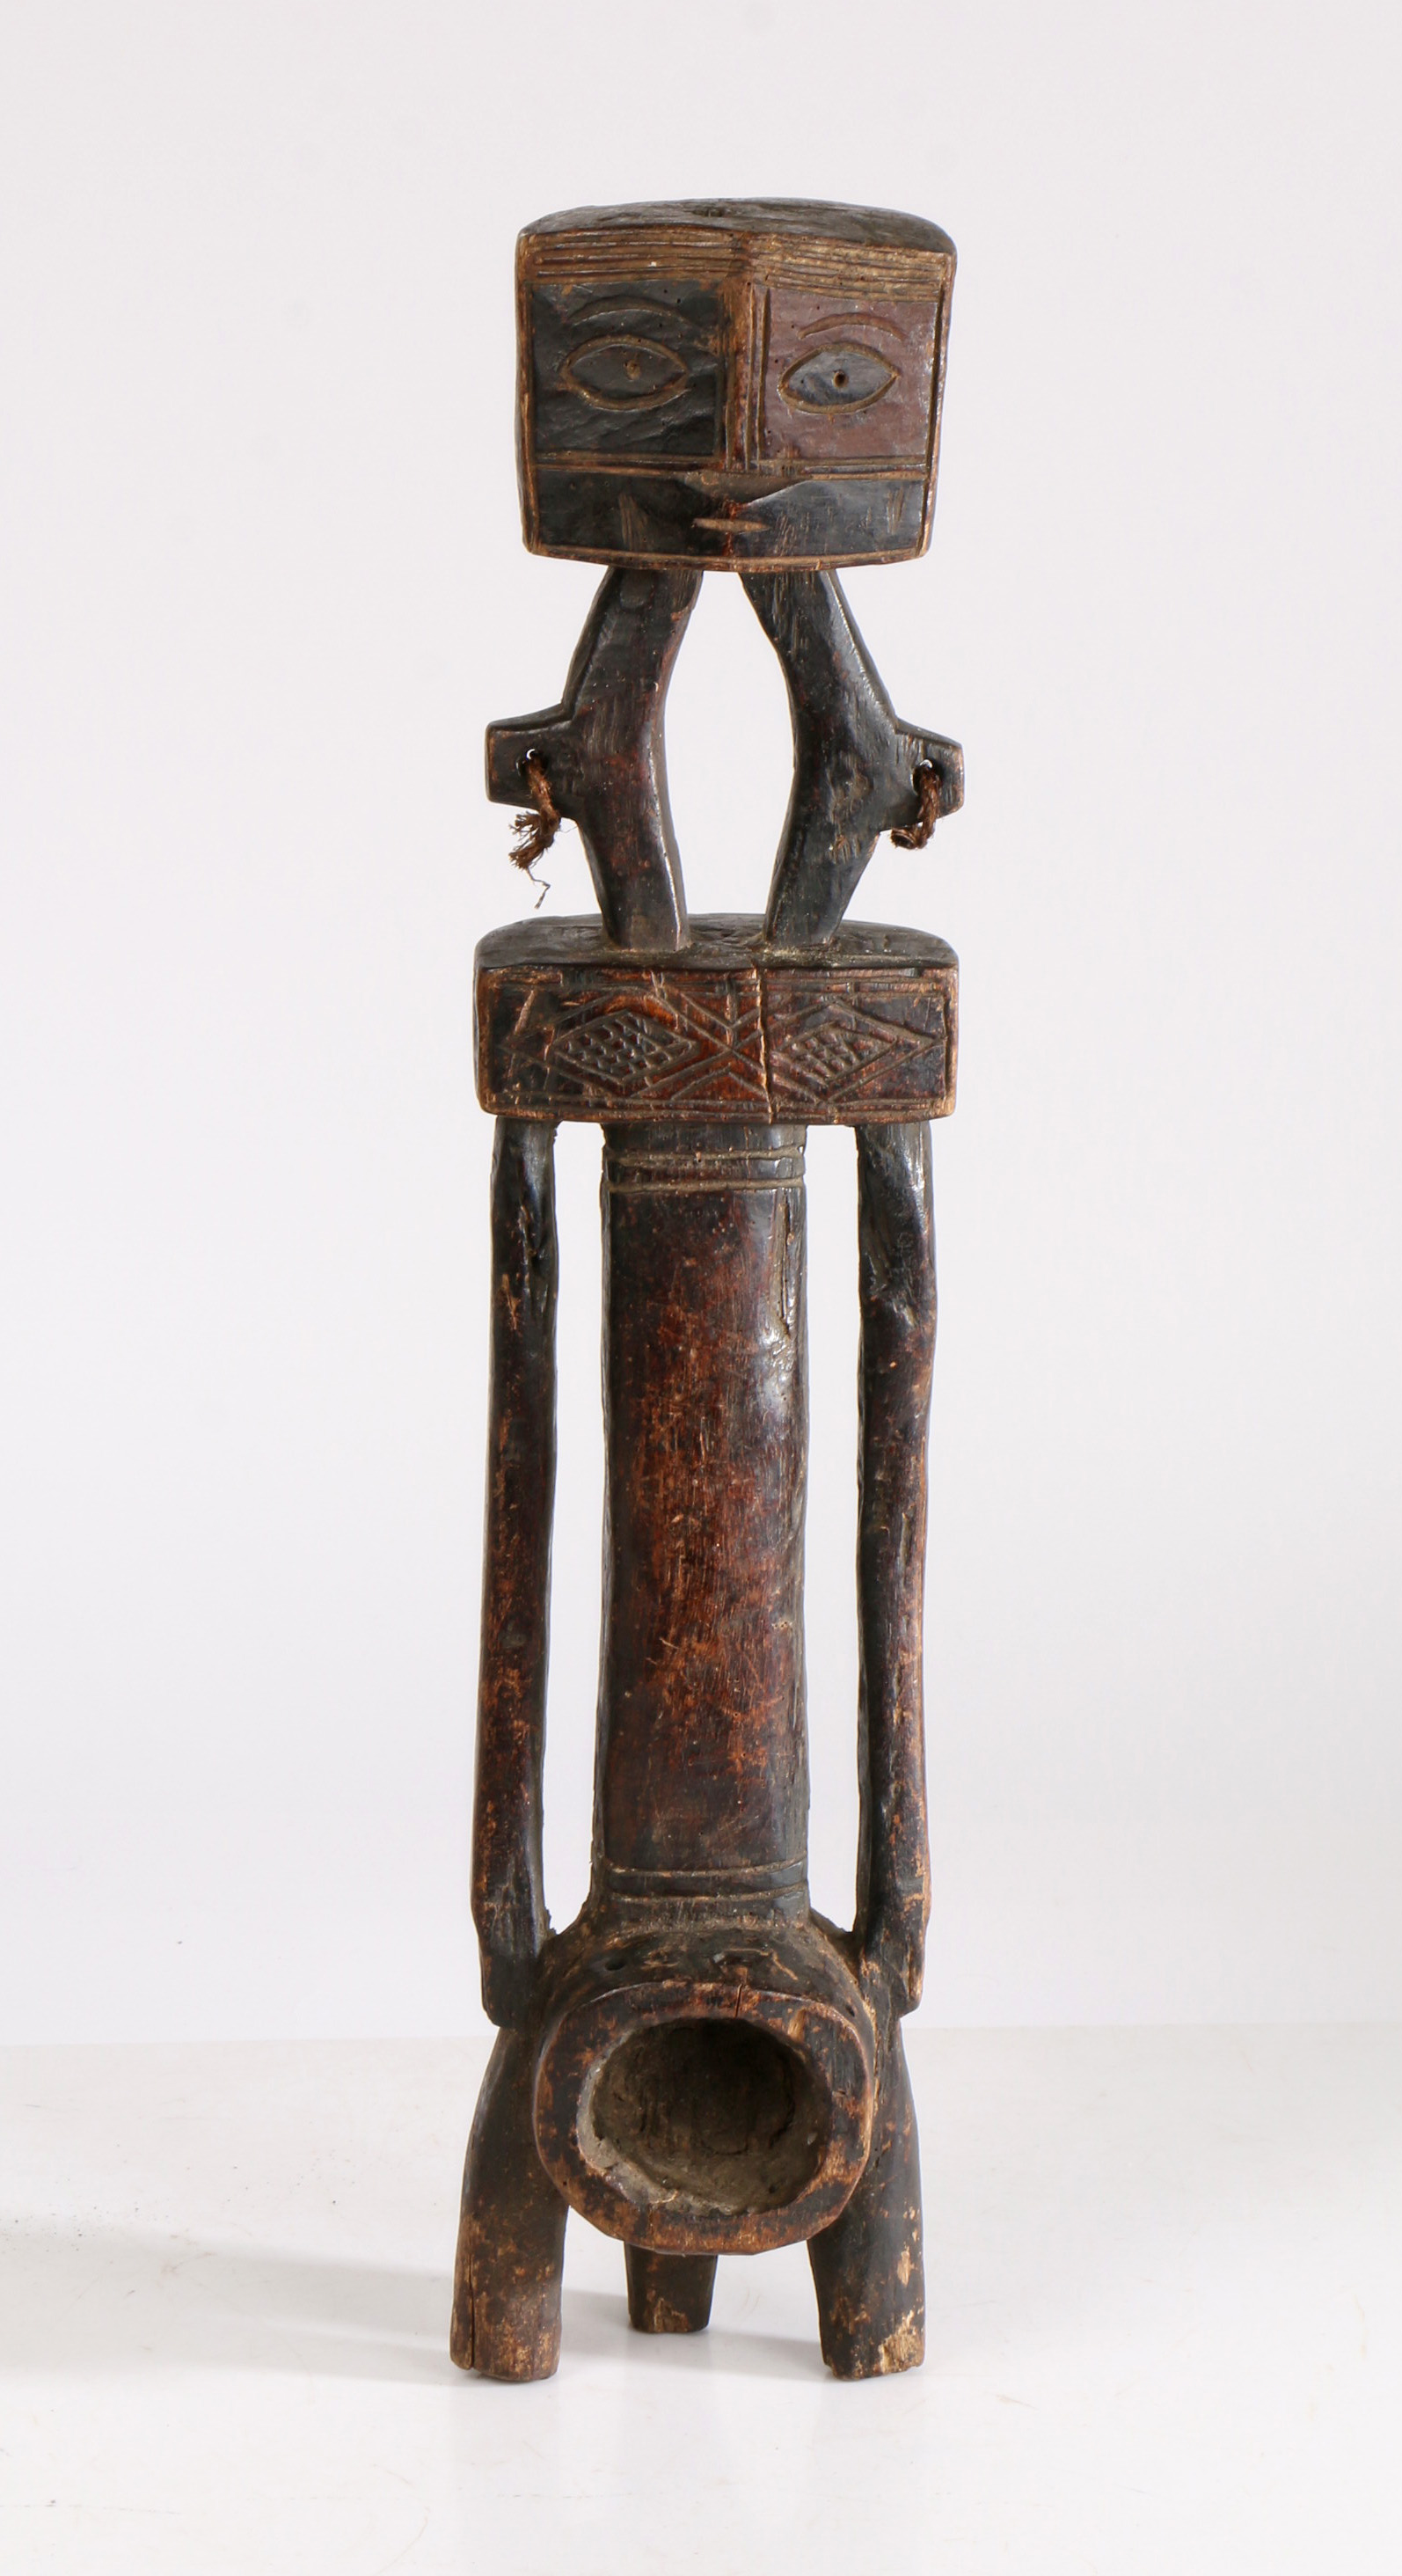 A East African Carved Figure of Ngombe from the Democratic Republic of Congo, having a geometric